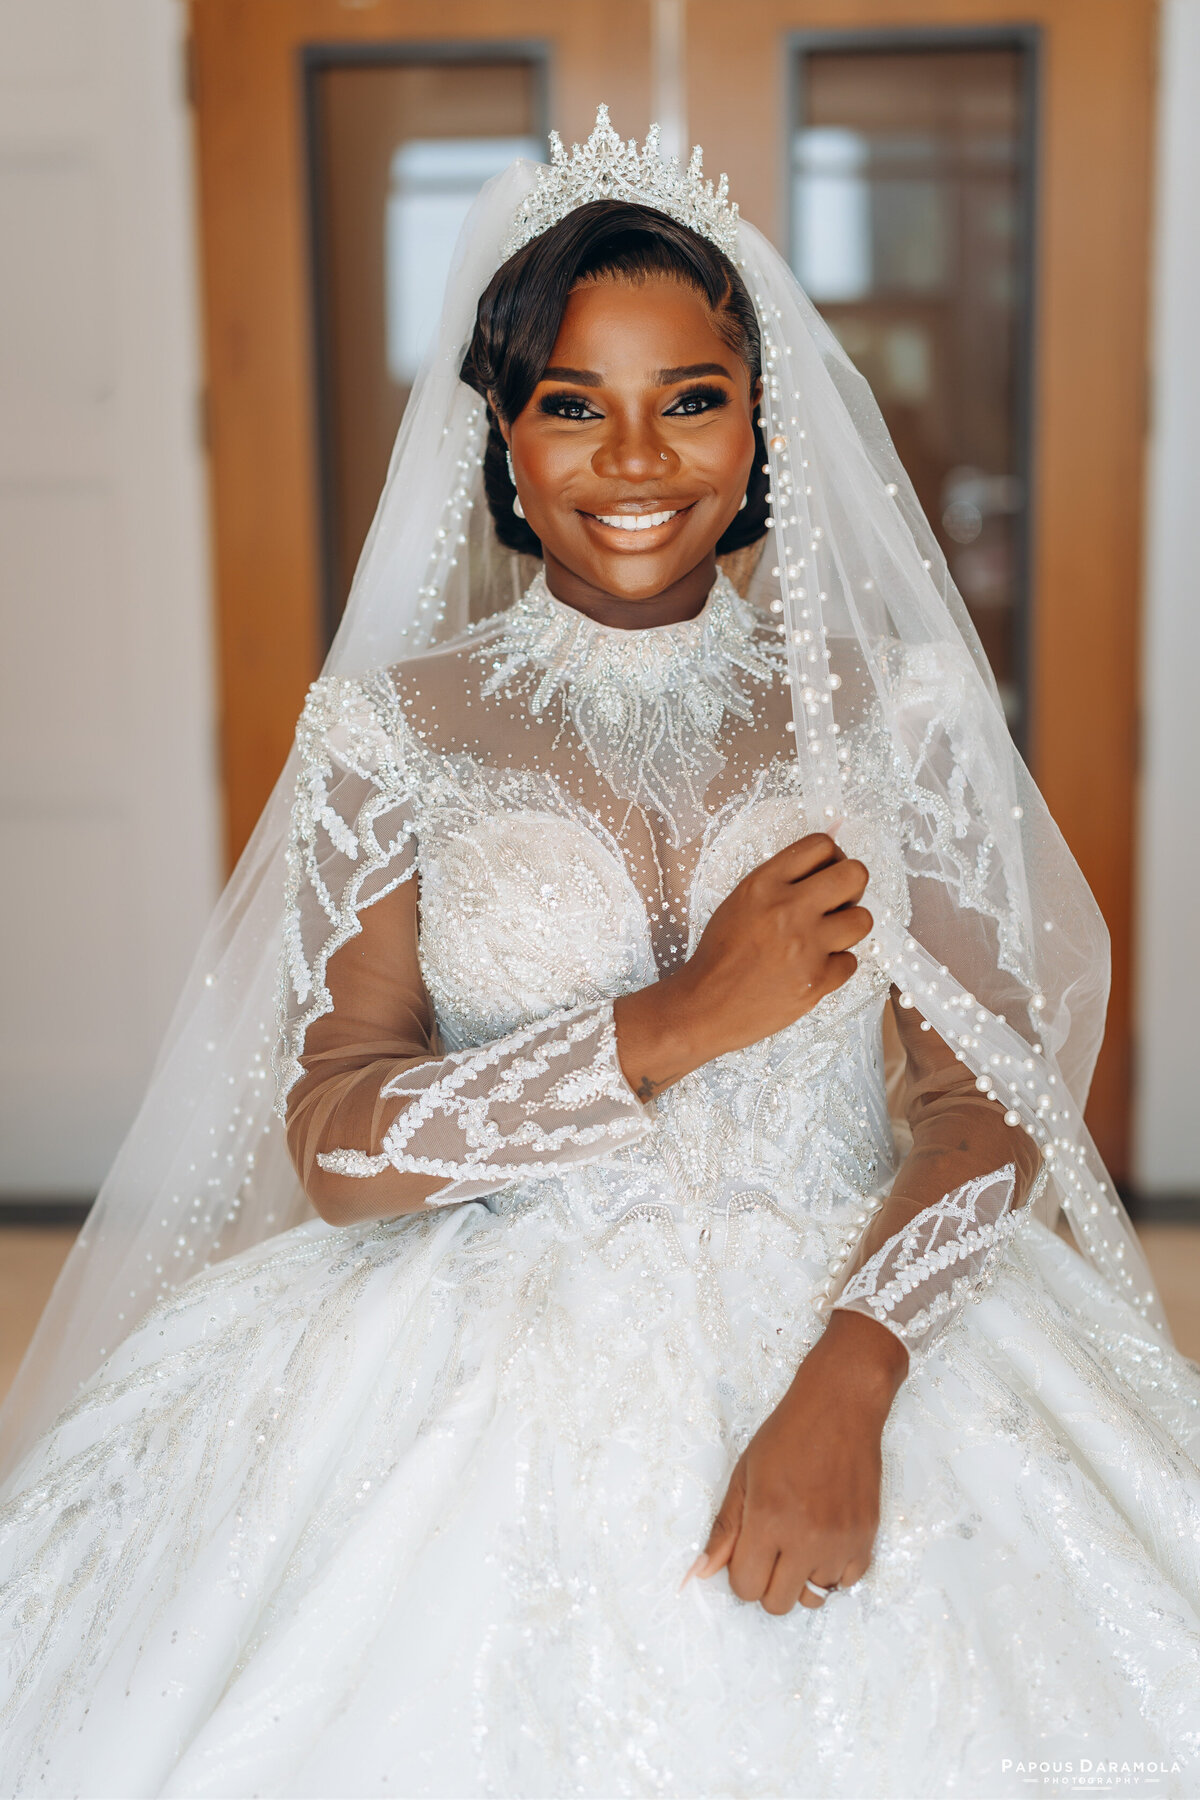 Abigail and Abije Oruka Events Papouse photographer Wedding event planners Toronto planner African Nigerian Eyitayo Dada Dara Ayoola outdoor ceremony floral princess ballgown rolls royce groom suit potraits  paradise banquet hall vaughn 102